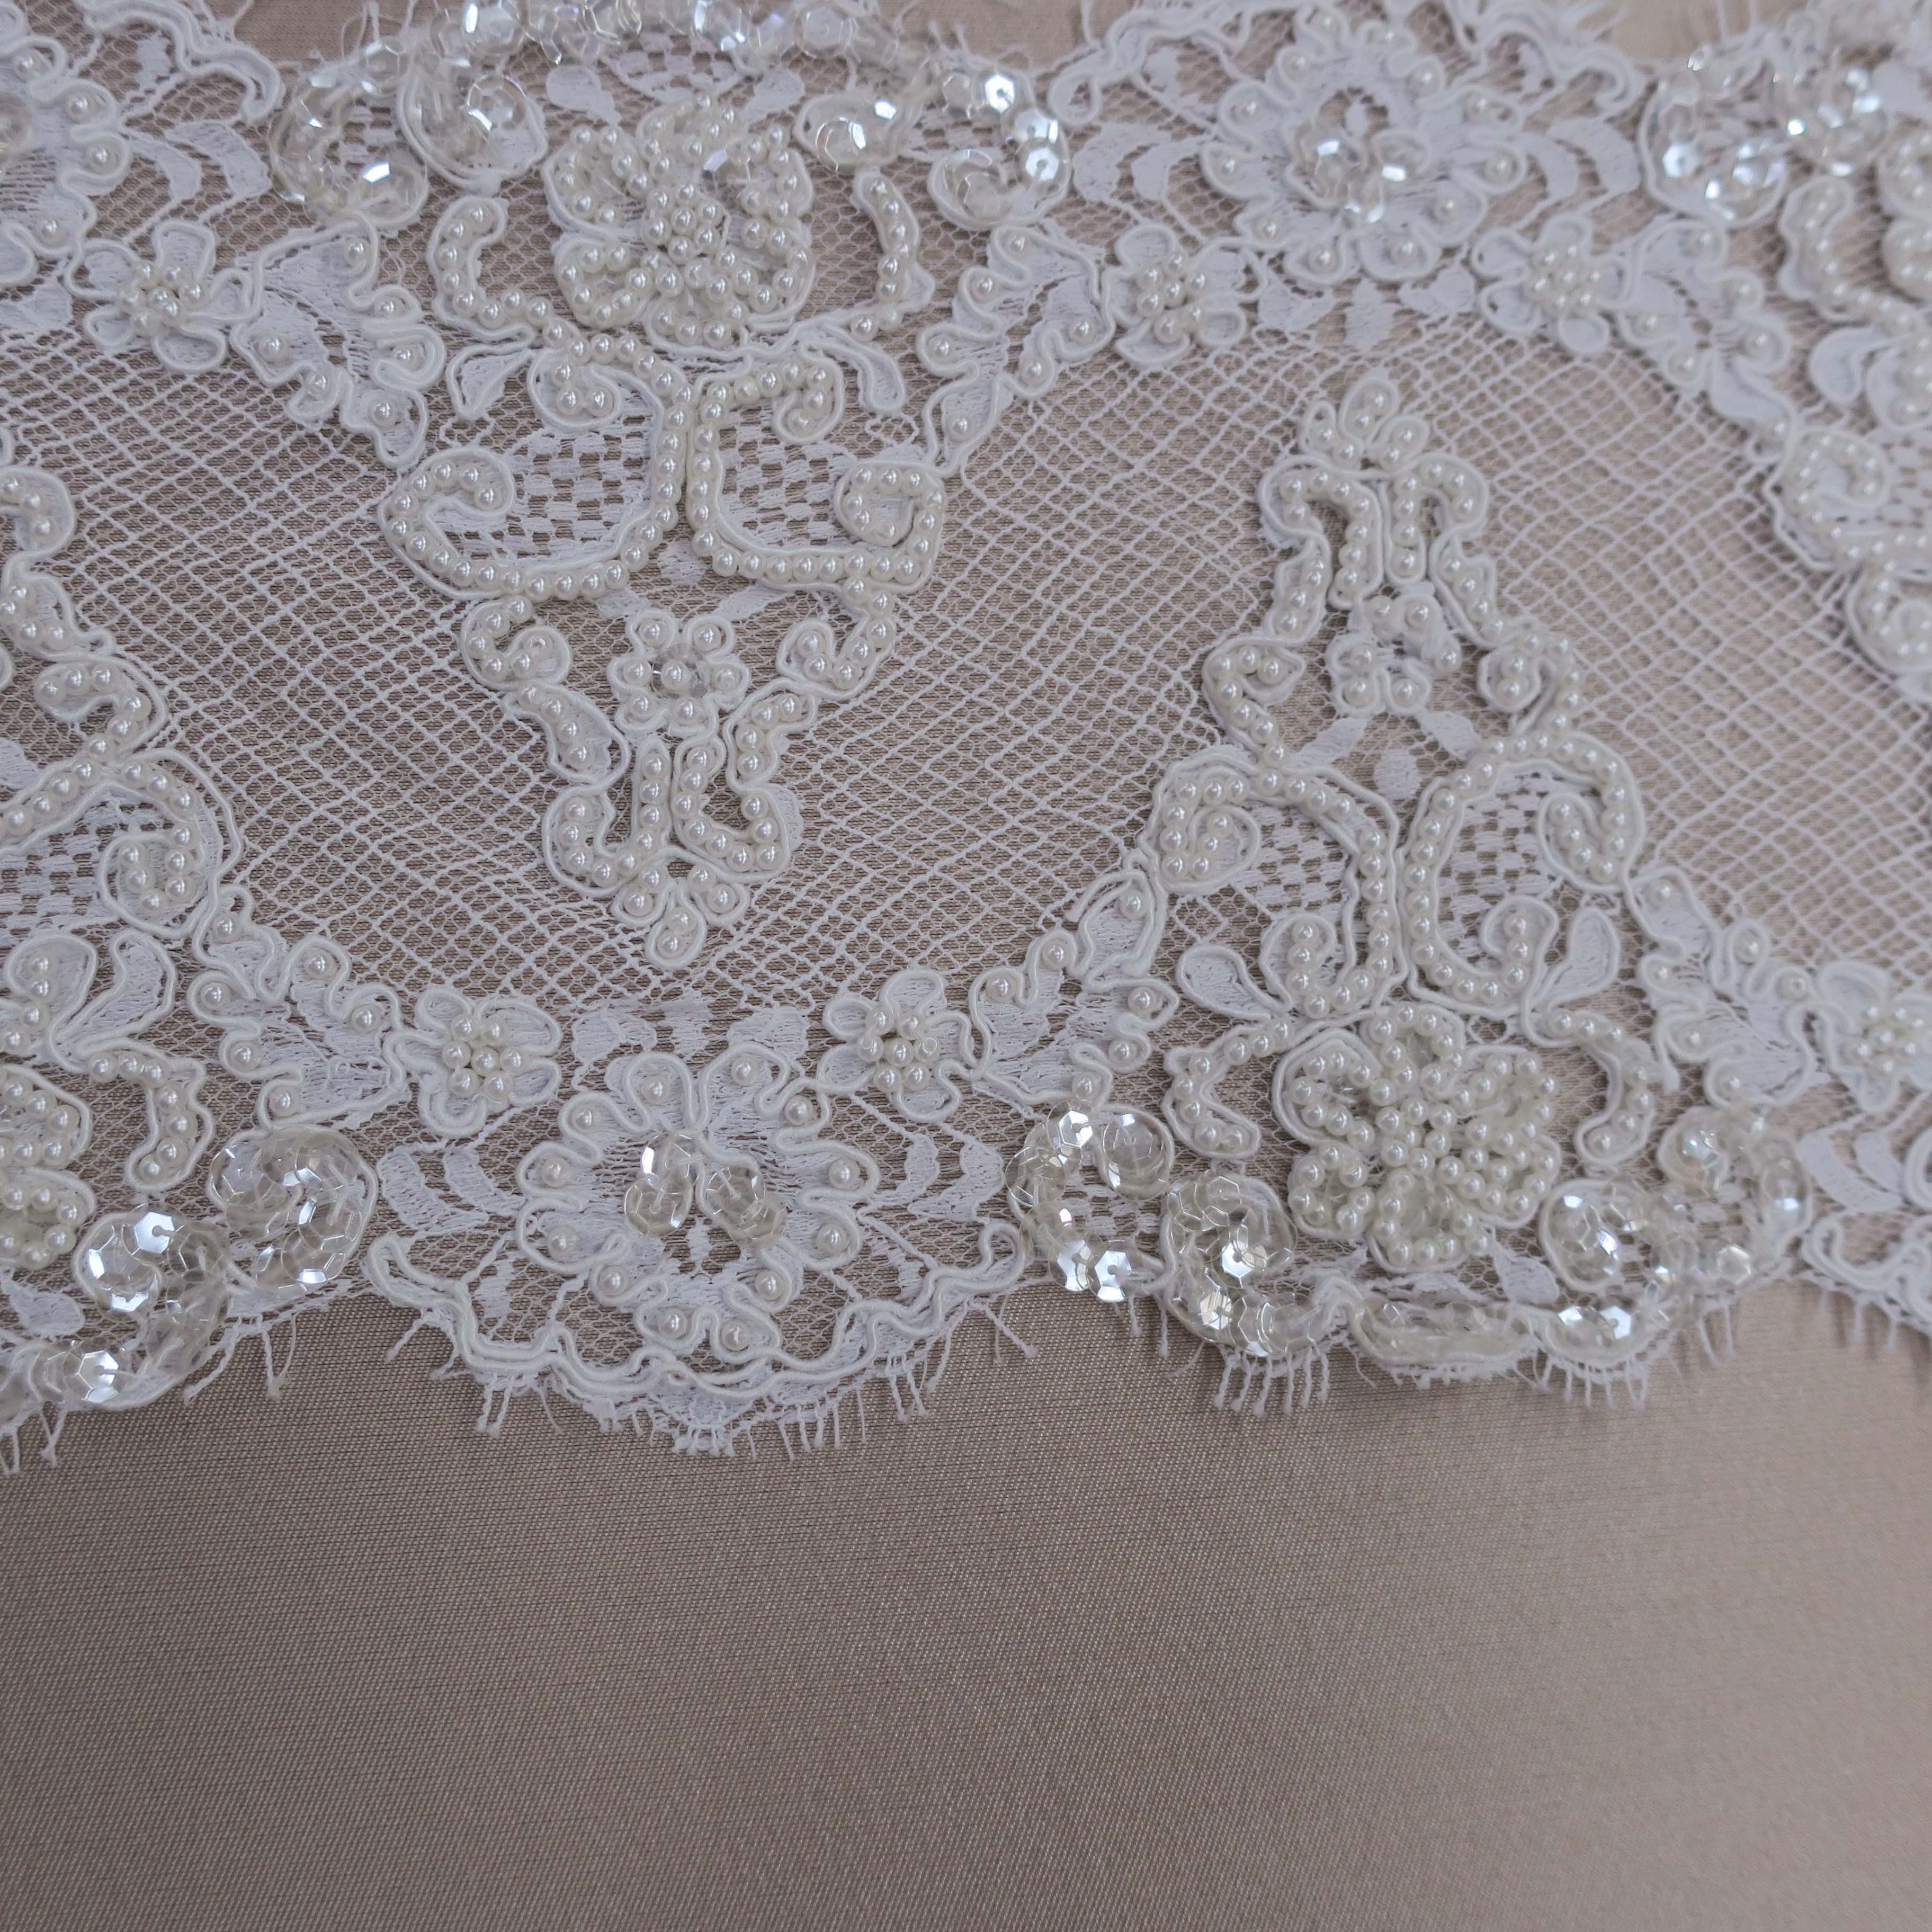 SAMPLE French Lace, White Lace Fabric, White Lace Material, Lace Fabric  Wedding, Lace Trim Veil, Spain Style Lace Trim 